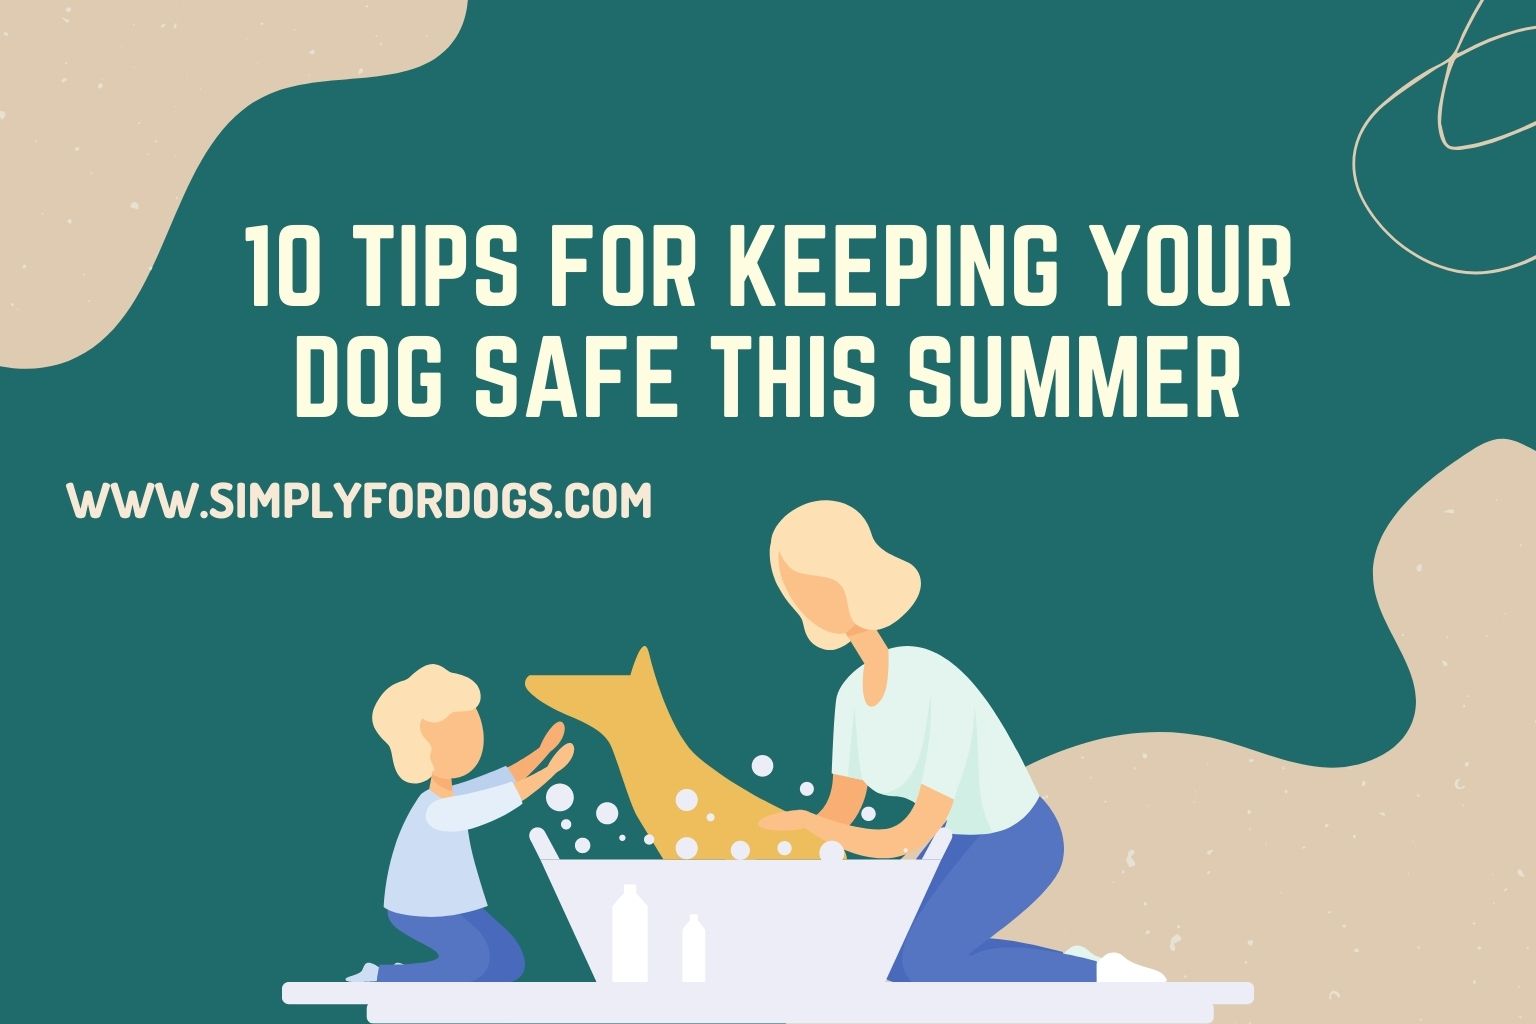 10 Tips for Keeping Your Dog Safe This Summer